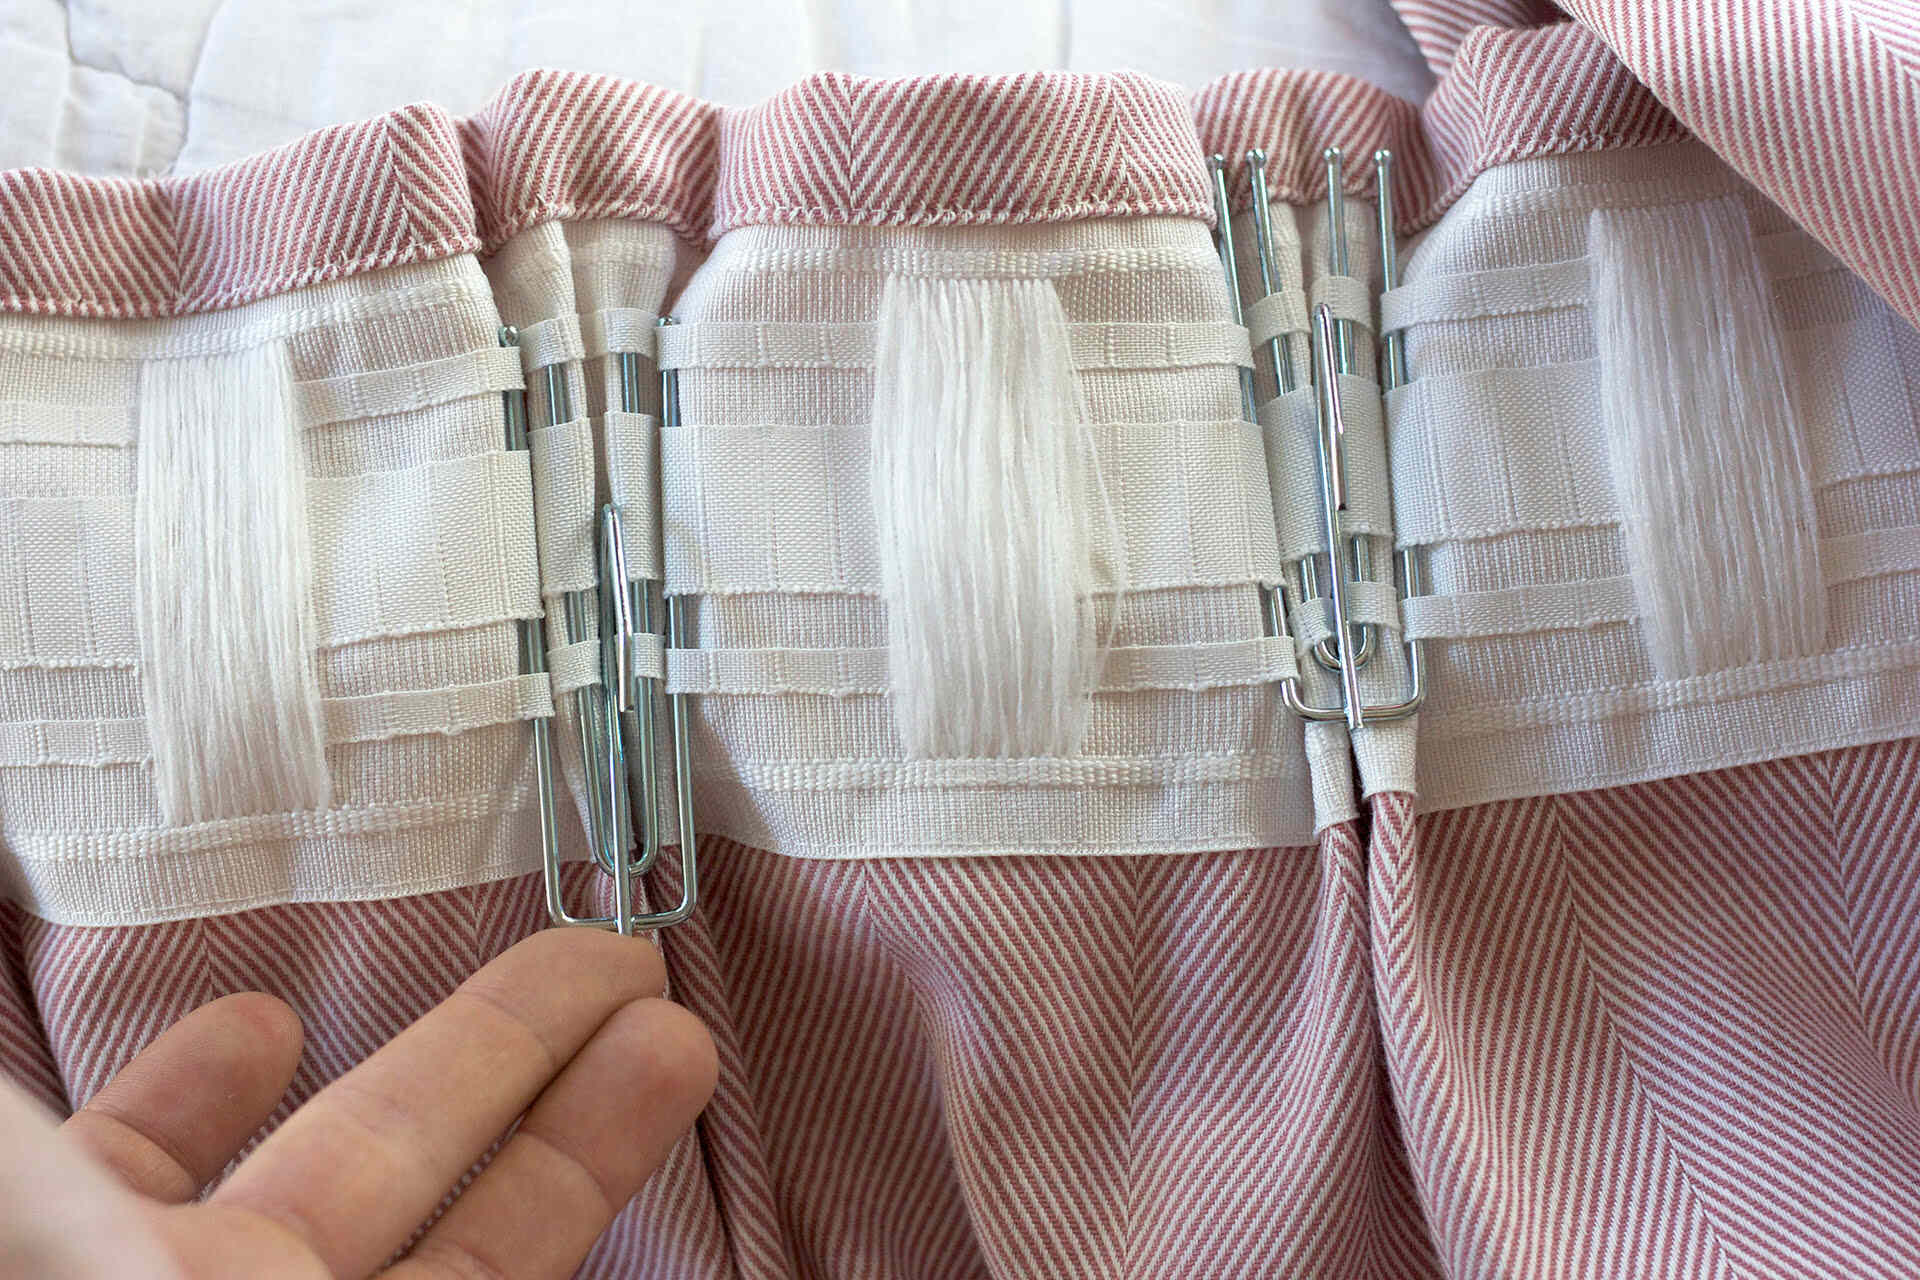 How To Pleat Curtains With Clips